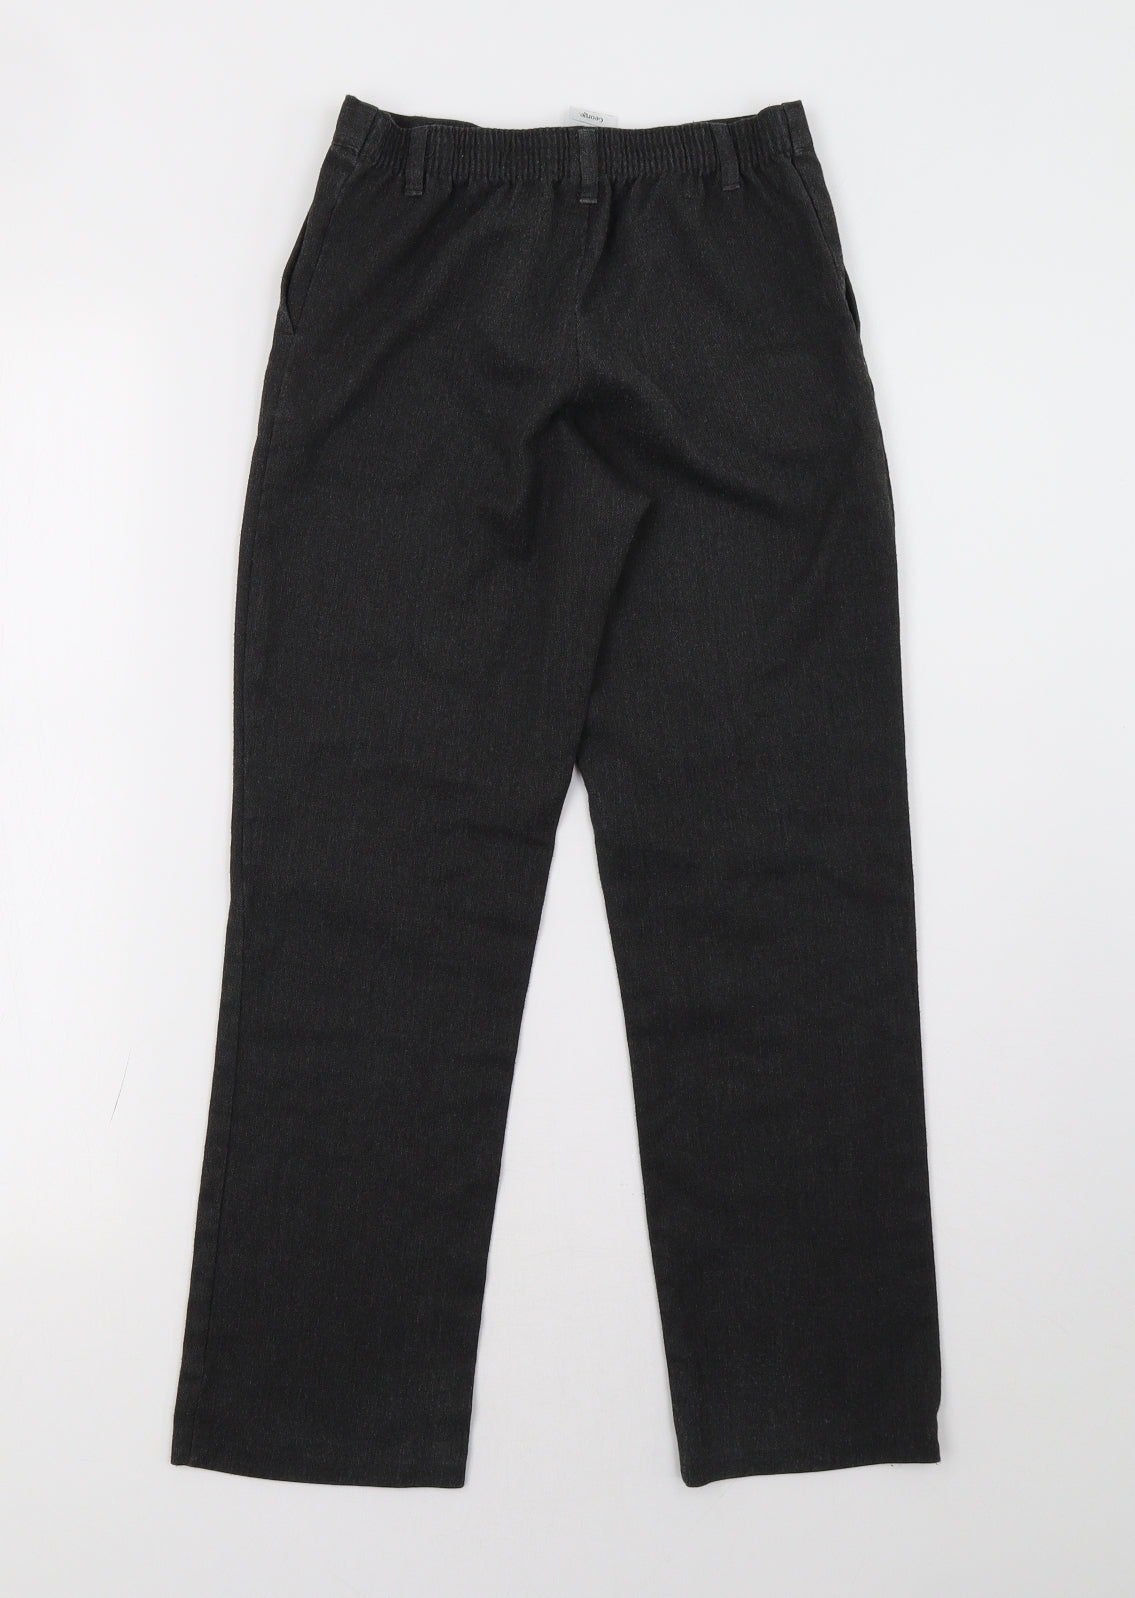 George Boys Grey    Trousers Size 10-11 Years